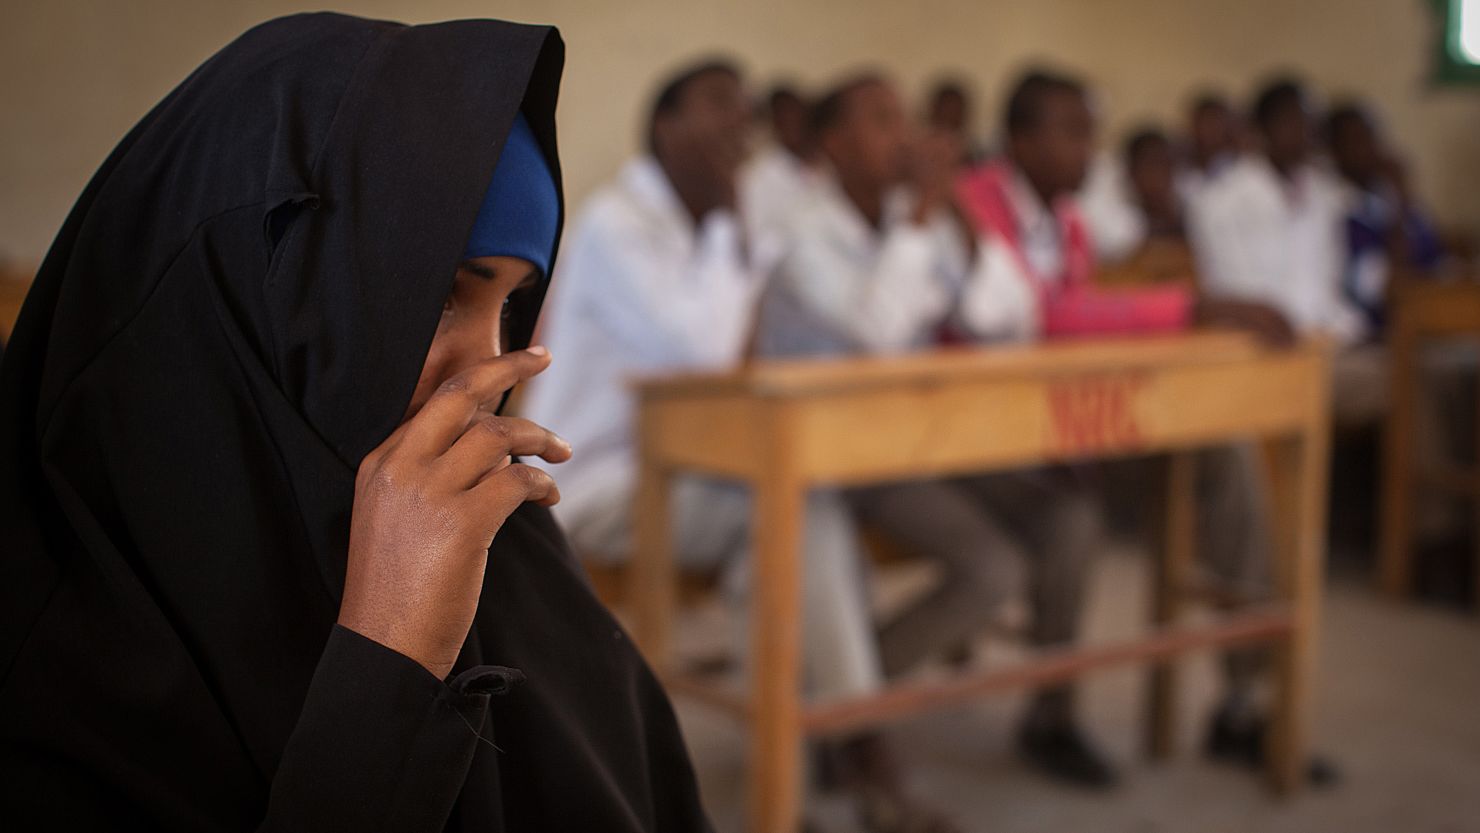  A discussion on female genital mutilation takes place at Sheikh Nuur primary school in Hargeysa, Somalia, on February 19, 2014. 